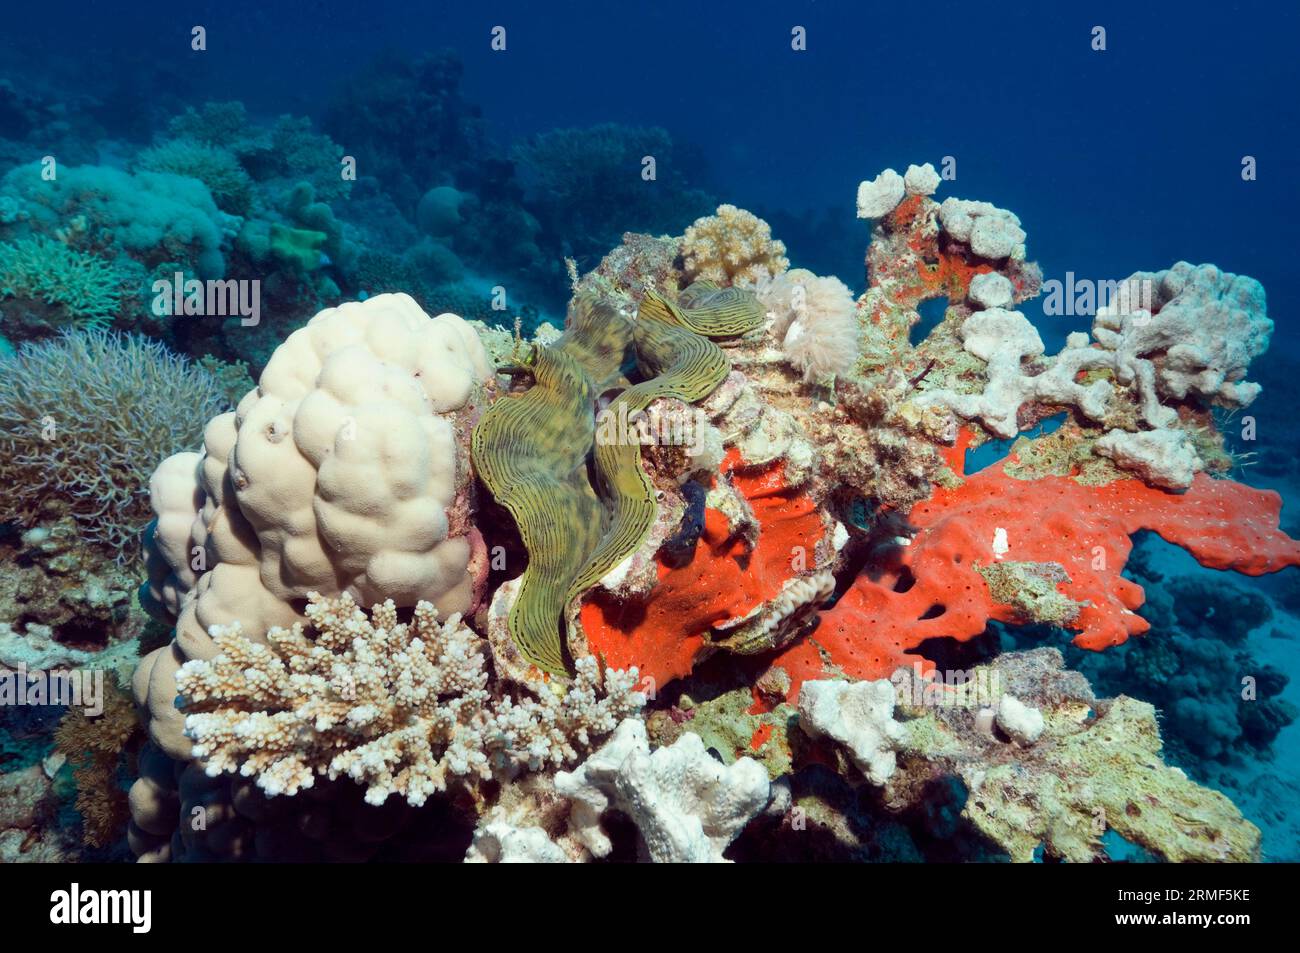 Maxima giant clam (Tridacna maxima) on corals and red boring sponge.  Egypt, Red Sea. Stock Photo